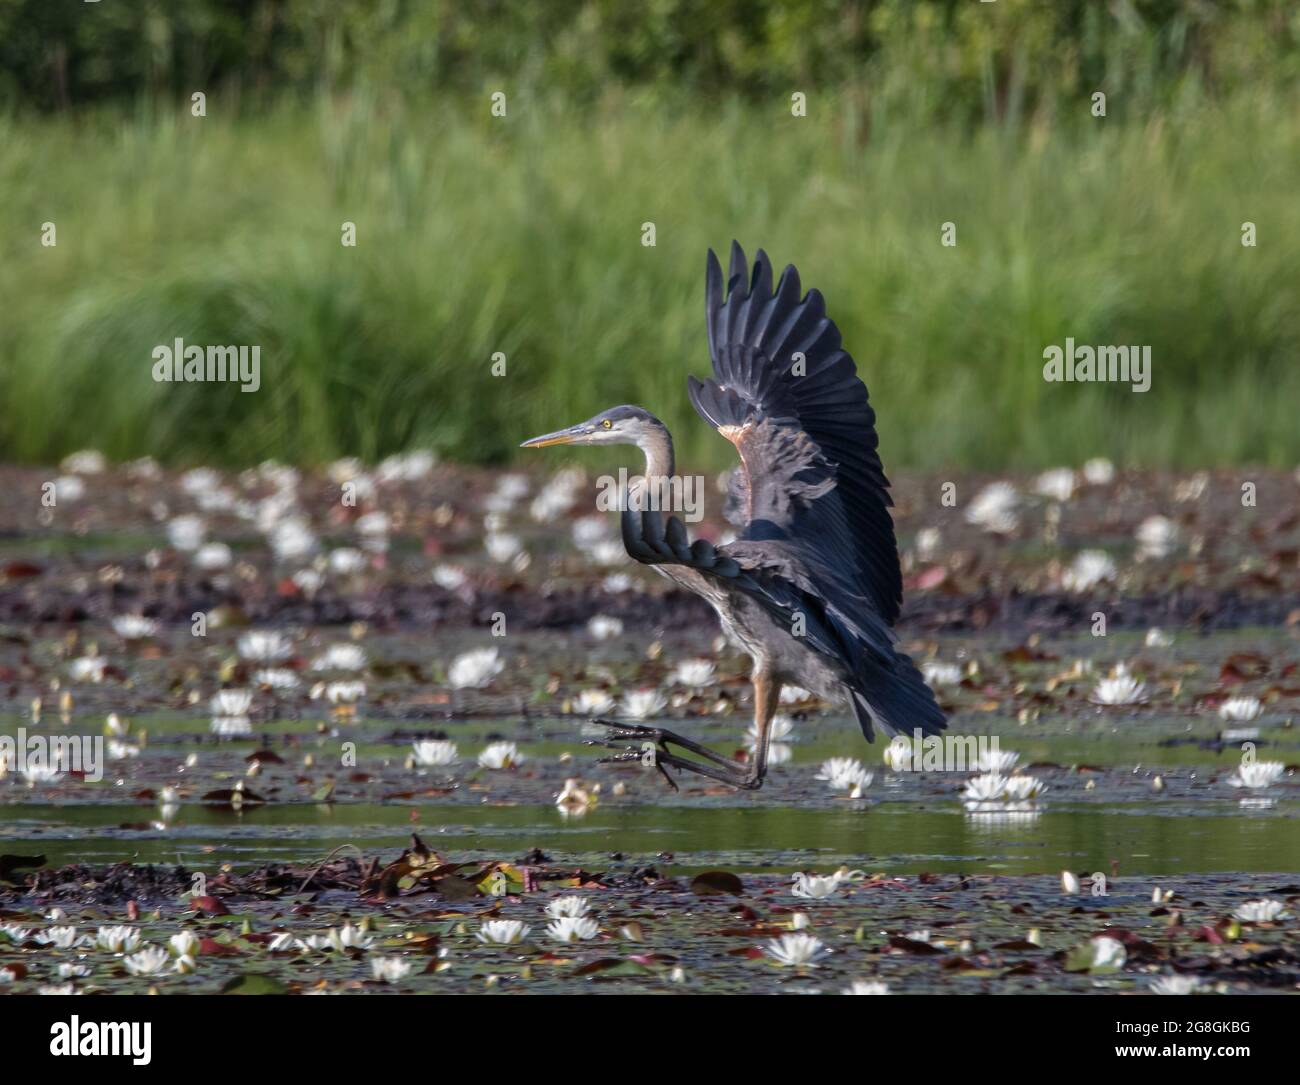 A great blue heron (Ardea herodias) standing in a pond of lilies with wings raised Stock Photo